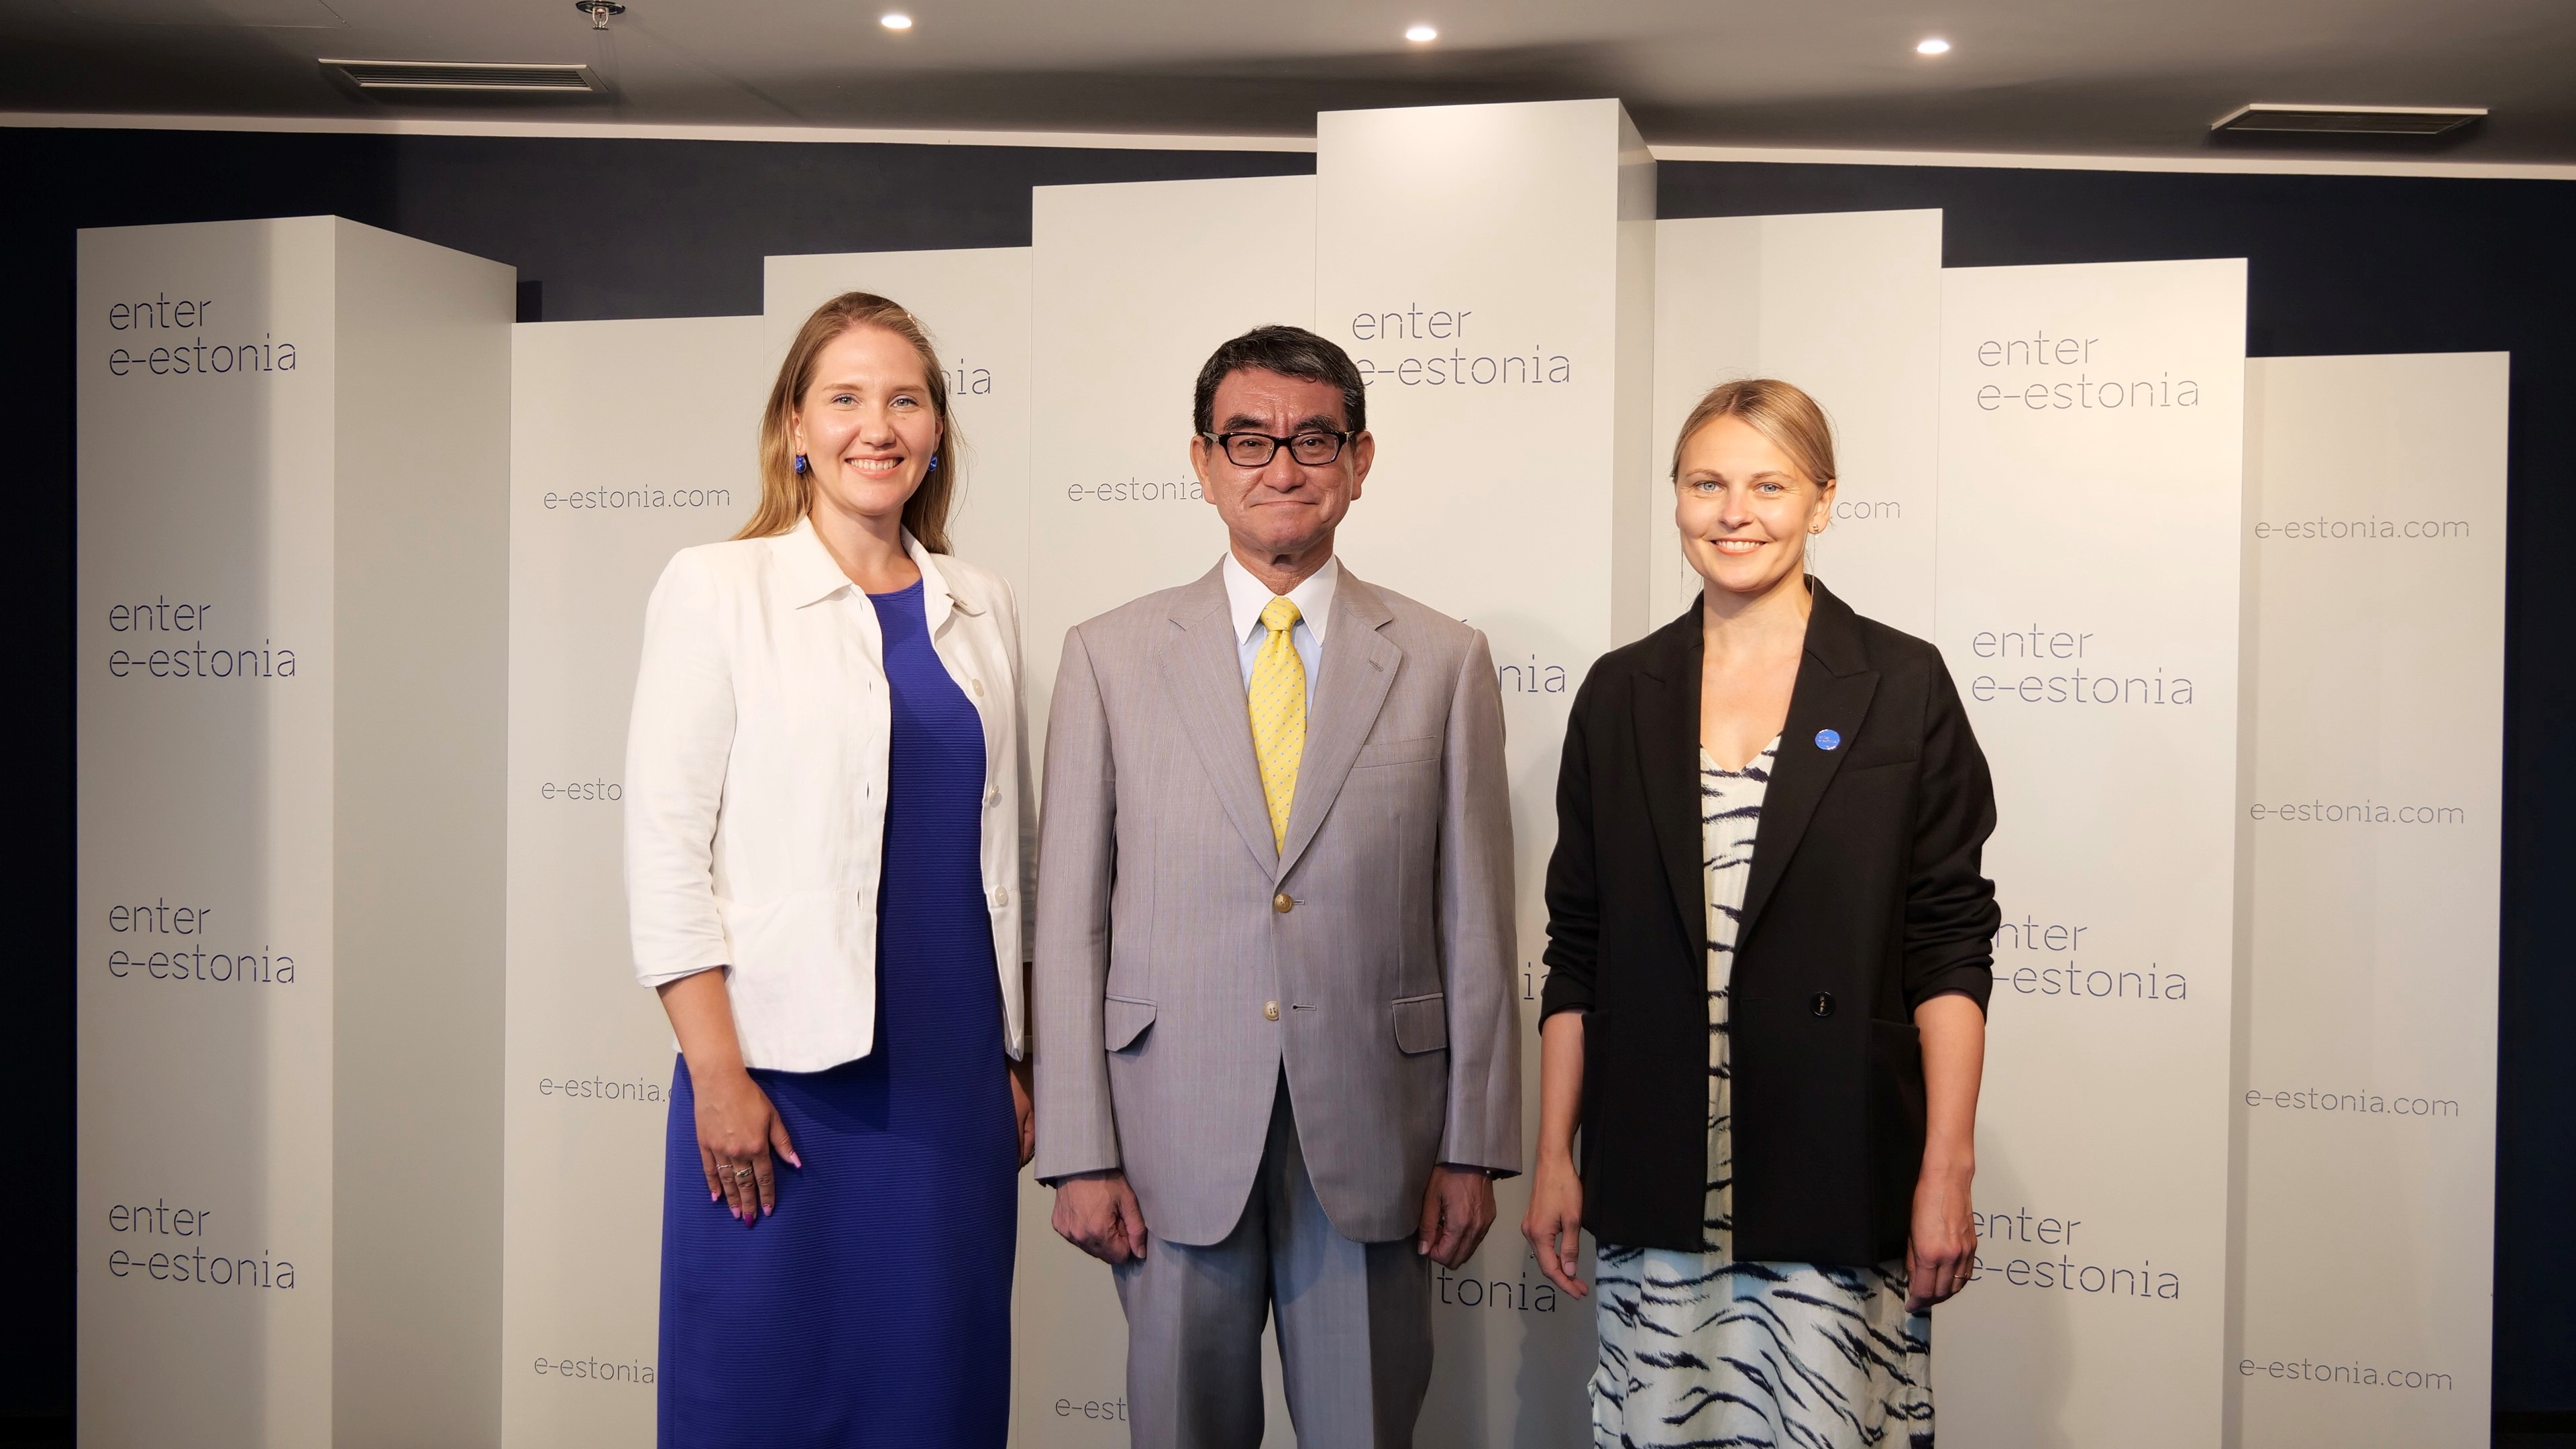 Photo at the e-Estonia Briefing Center. Minister Kono is standing in the center of the group photo of the three.